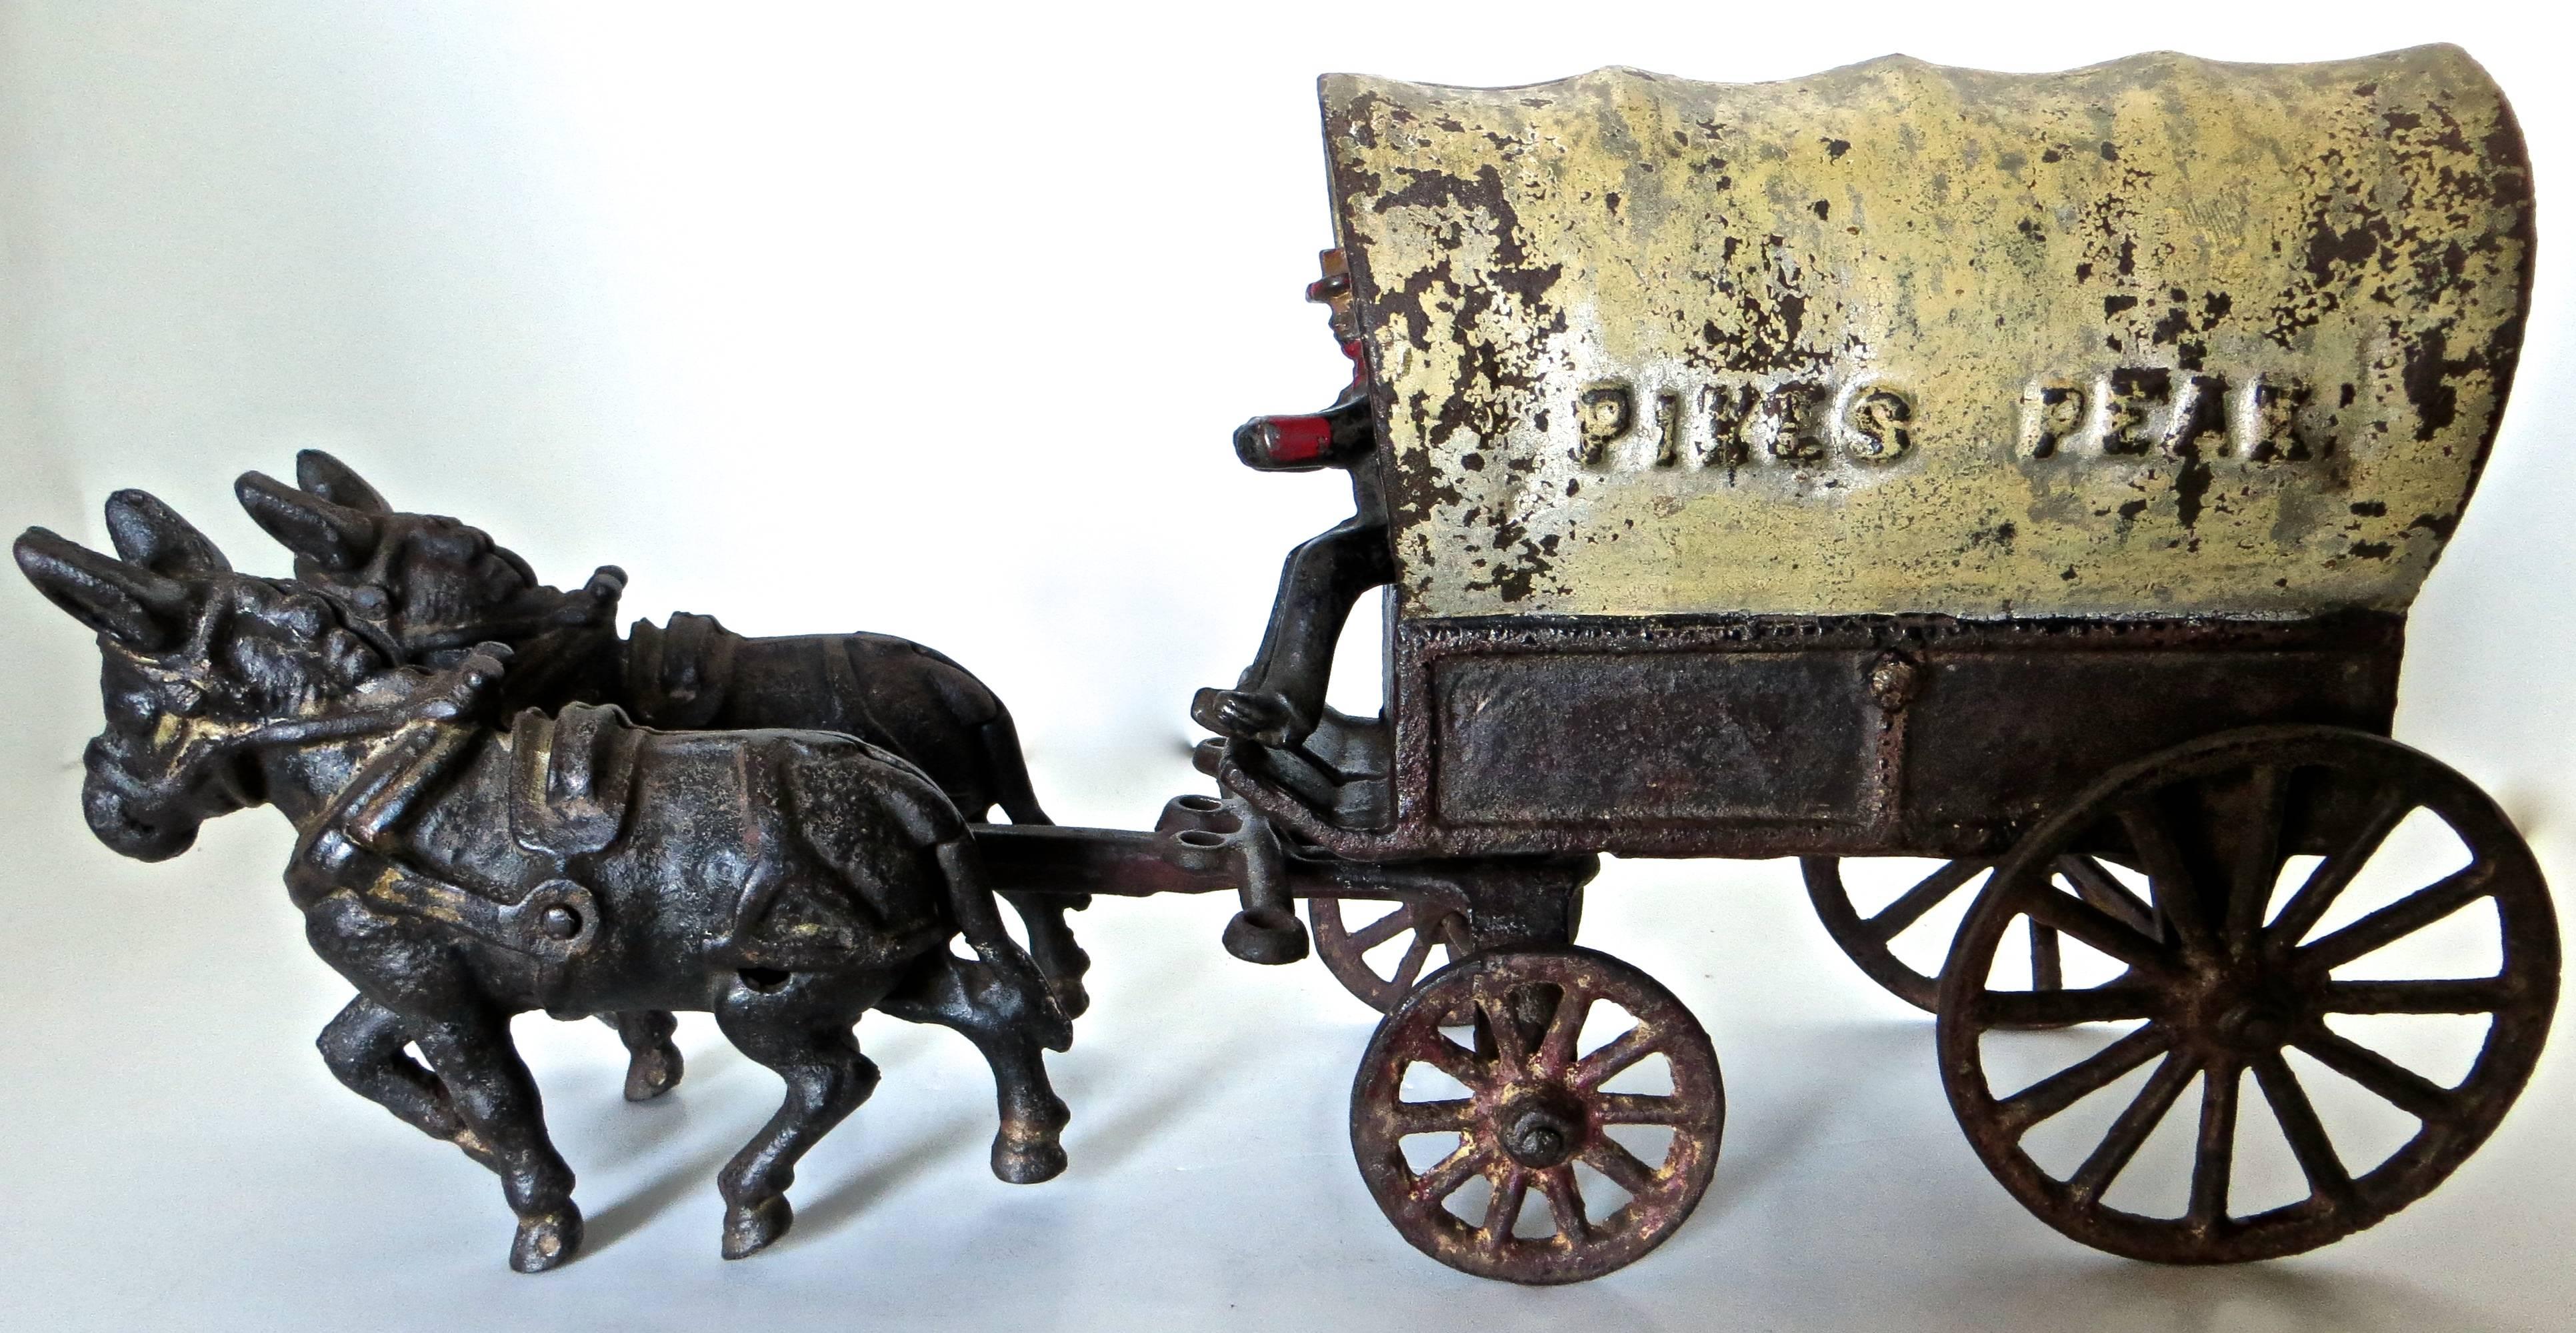 Original cast iron mule drawn covered conestoga wagon with original driver, wheels, and mules. A conestoga wagon was what the pioneers and gold seekers used to transport all of their belongings for the long journey westward. It was heavier than most